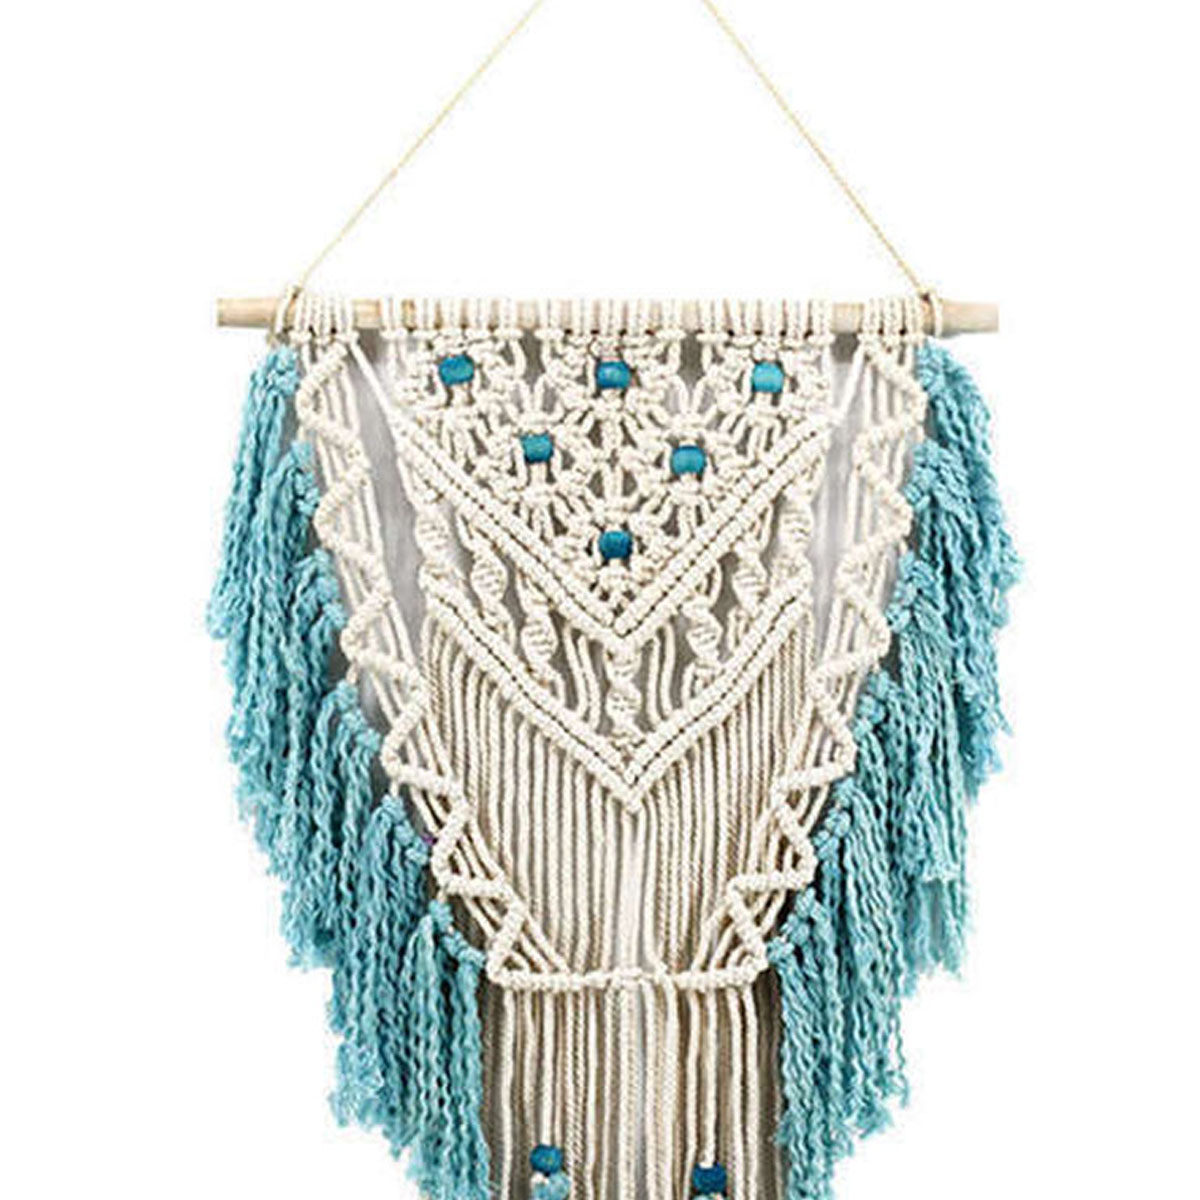 Hand-Knotted-Macrame-Wall-Art-Handmade-Bohemian-Hanging-Tapestry-Room-Decorations-1637667-6